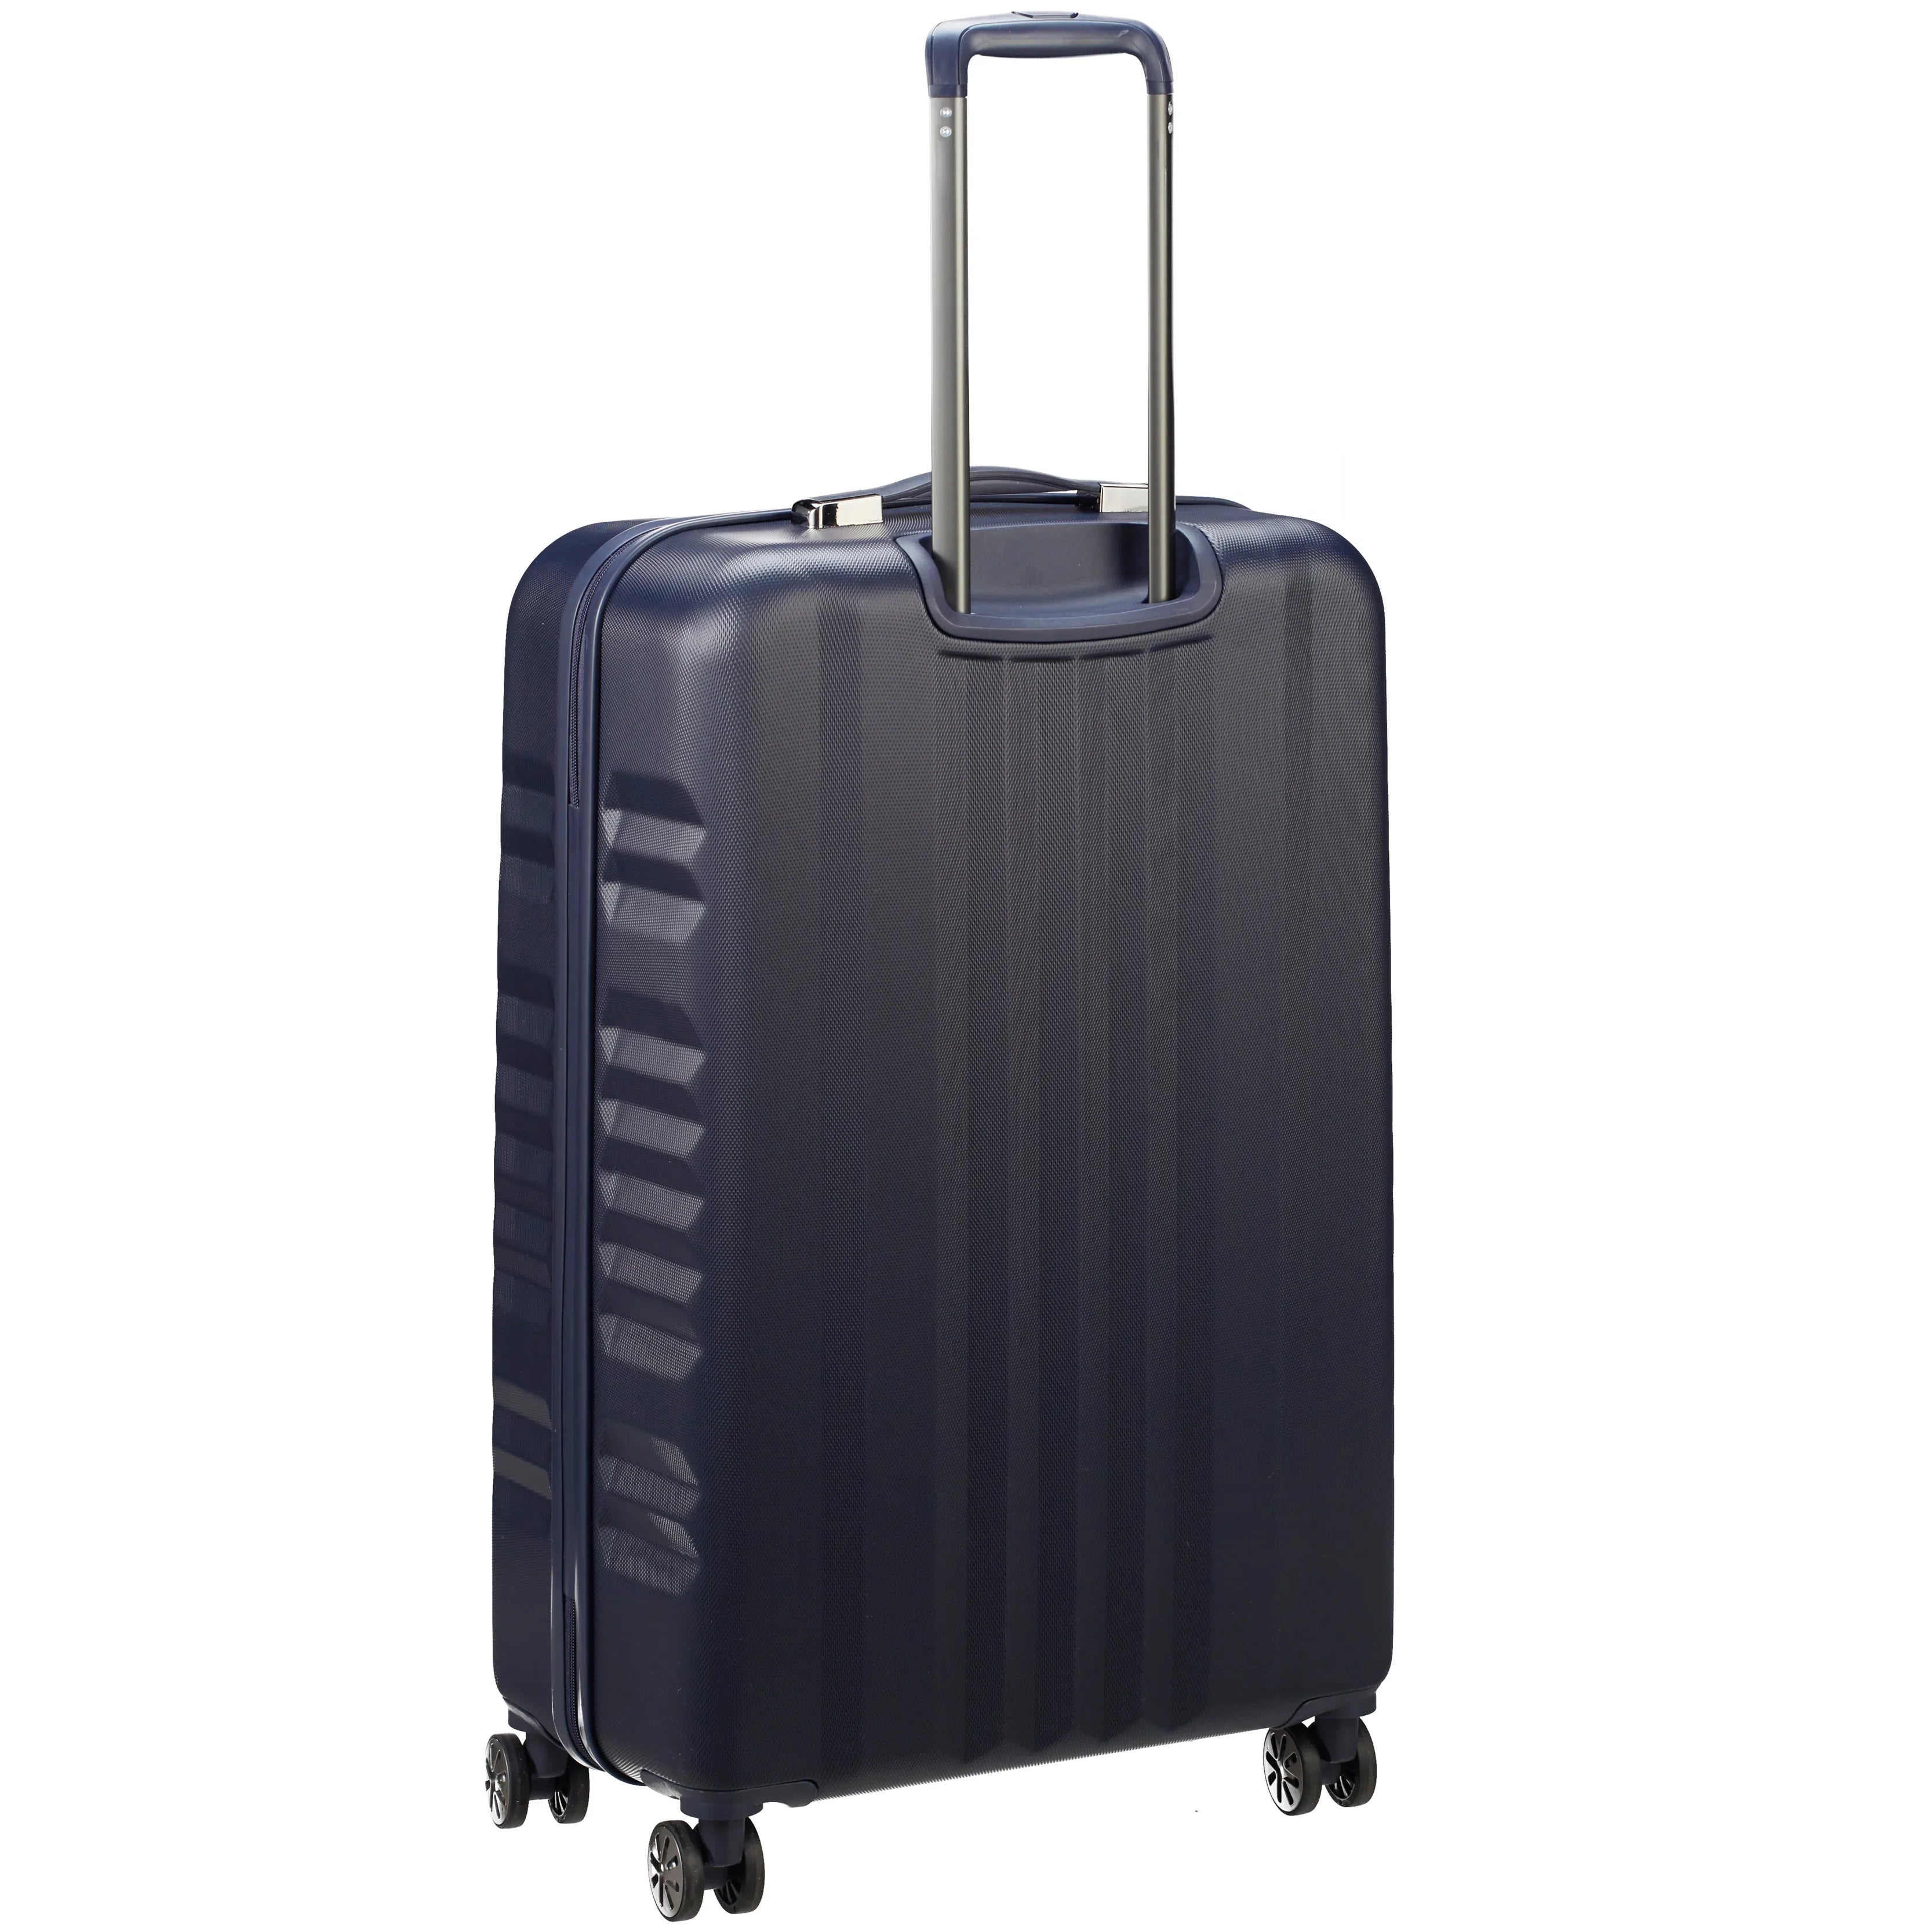 March 15 Trading Fly 4-Rollen Trolley 65 cm - black brushed